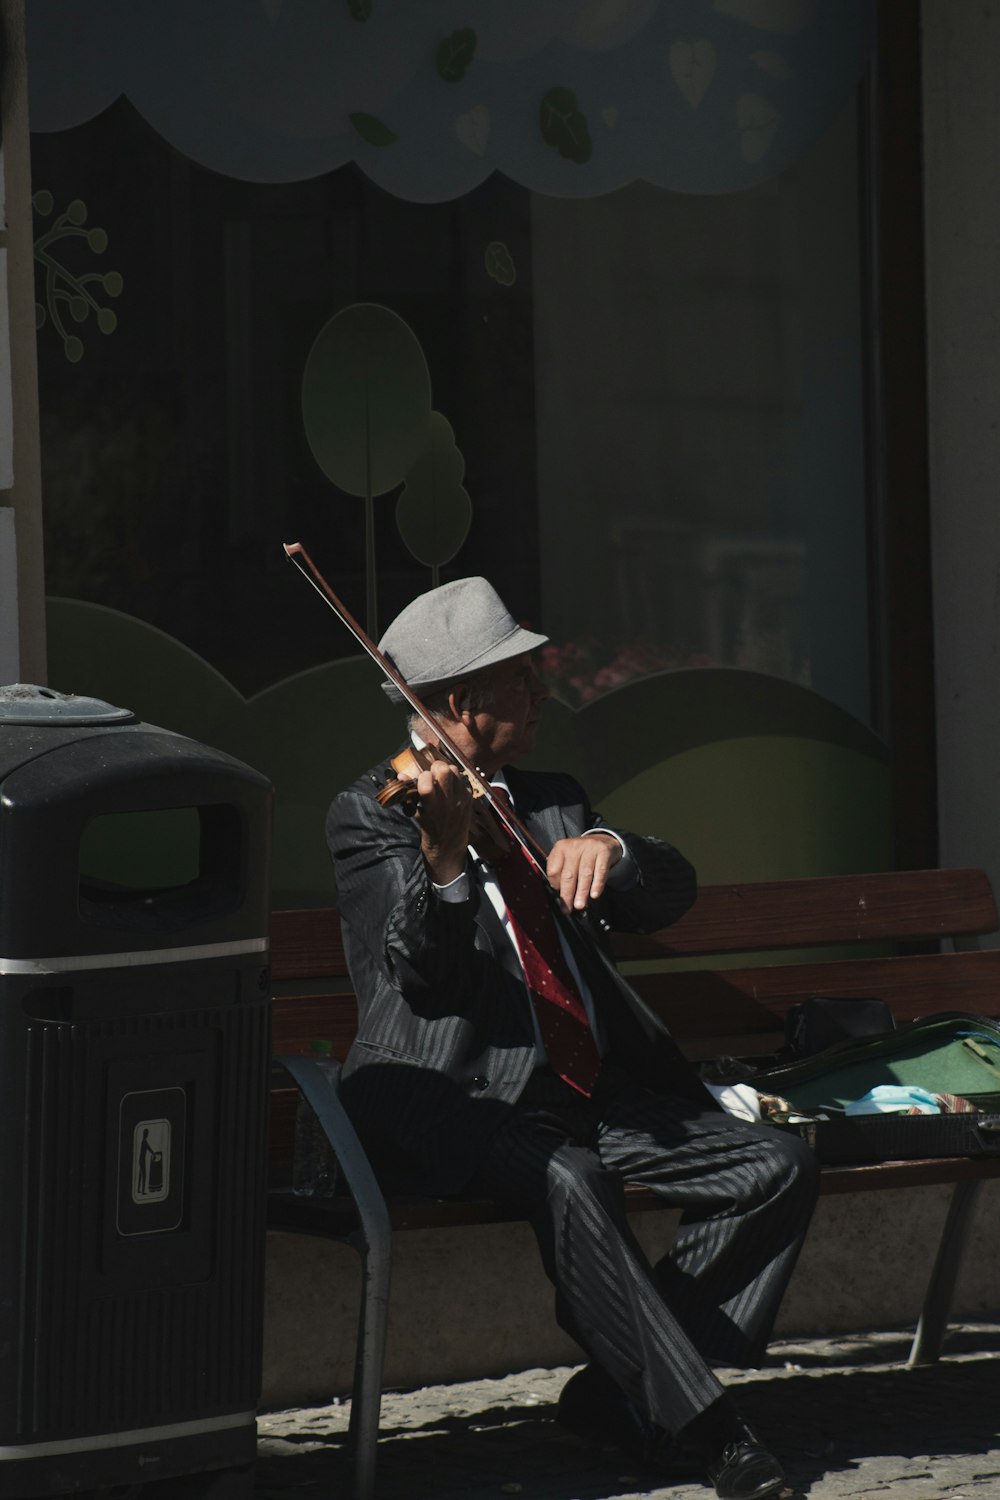 a man sitting on a bench playing a violin